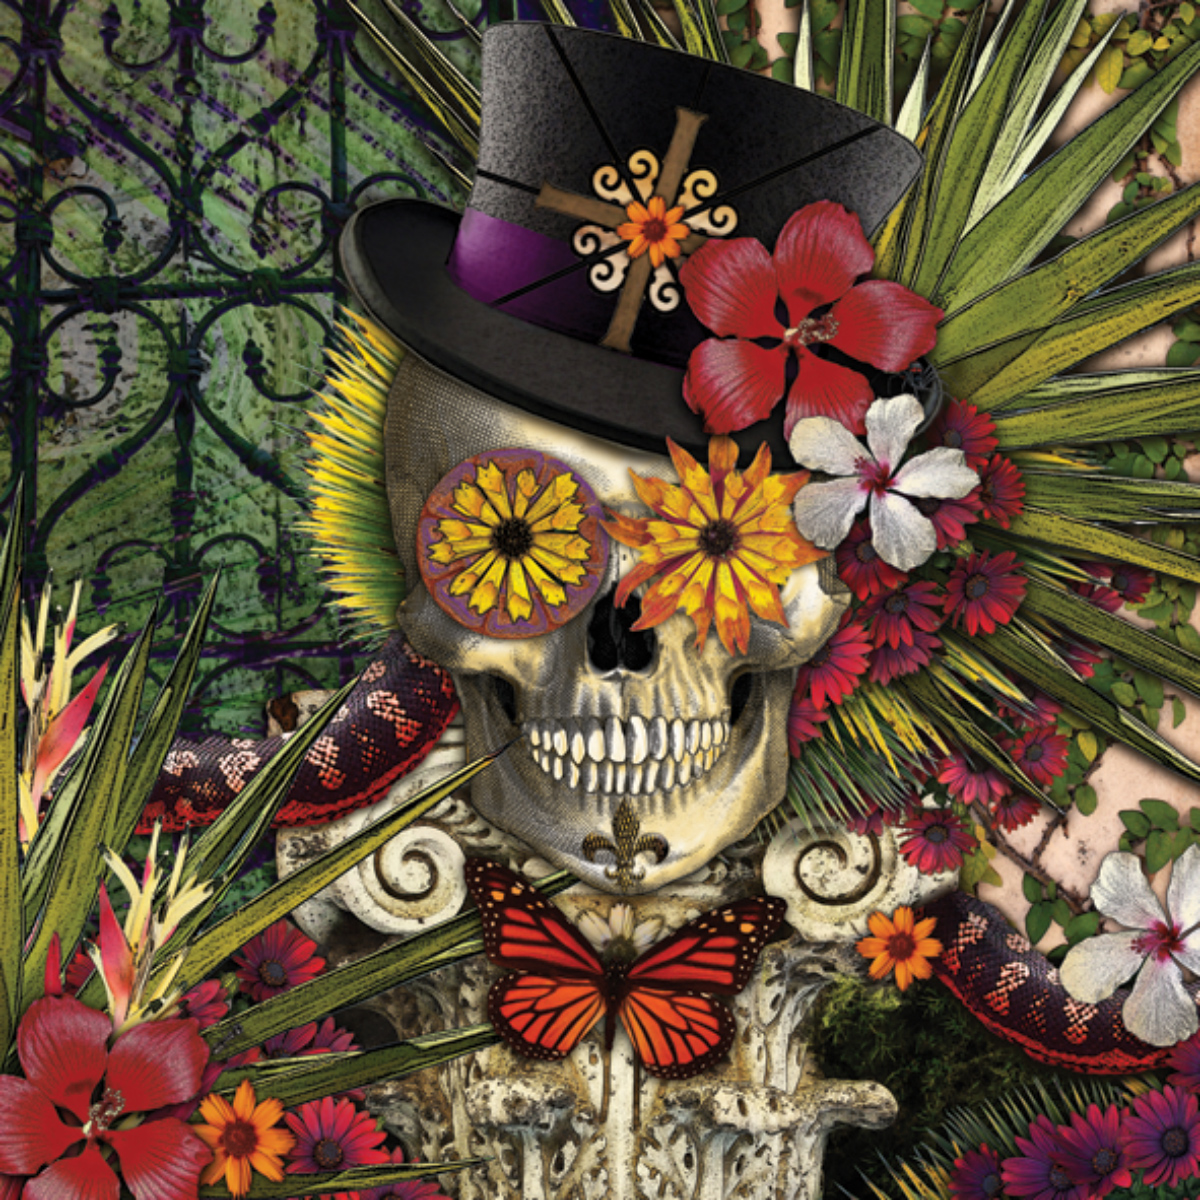 Baron in Bloom Gothic Art Jigsaw Puzzle